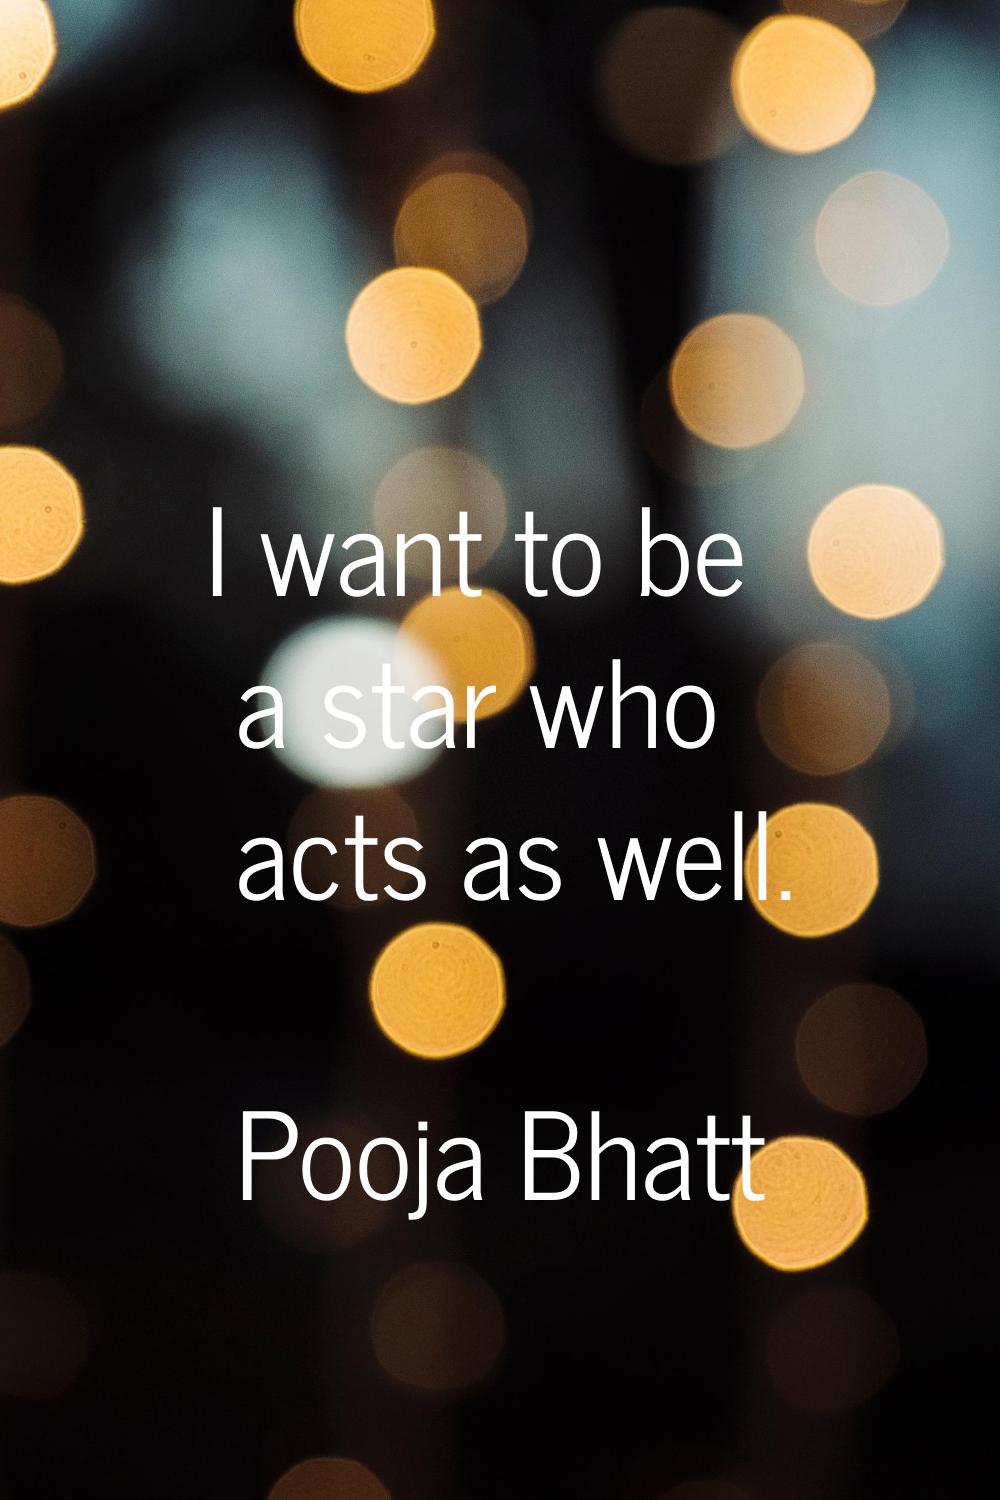 I want to be a star who acts as well.